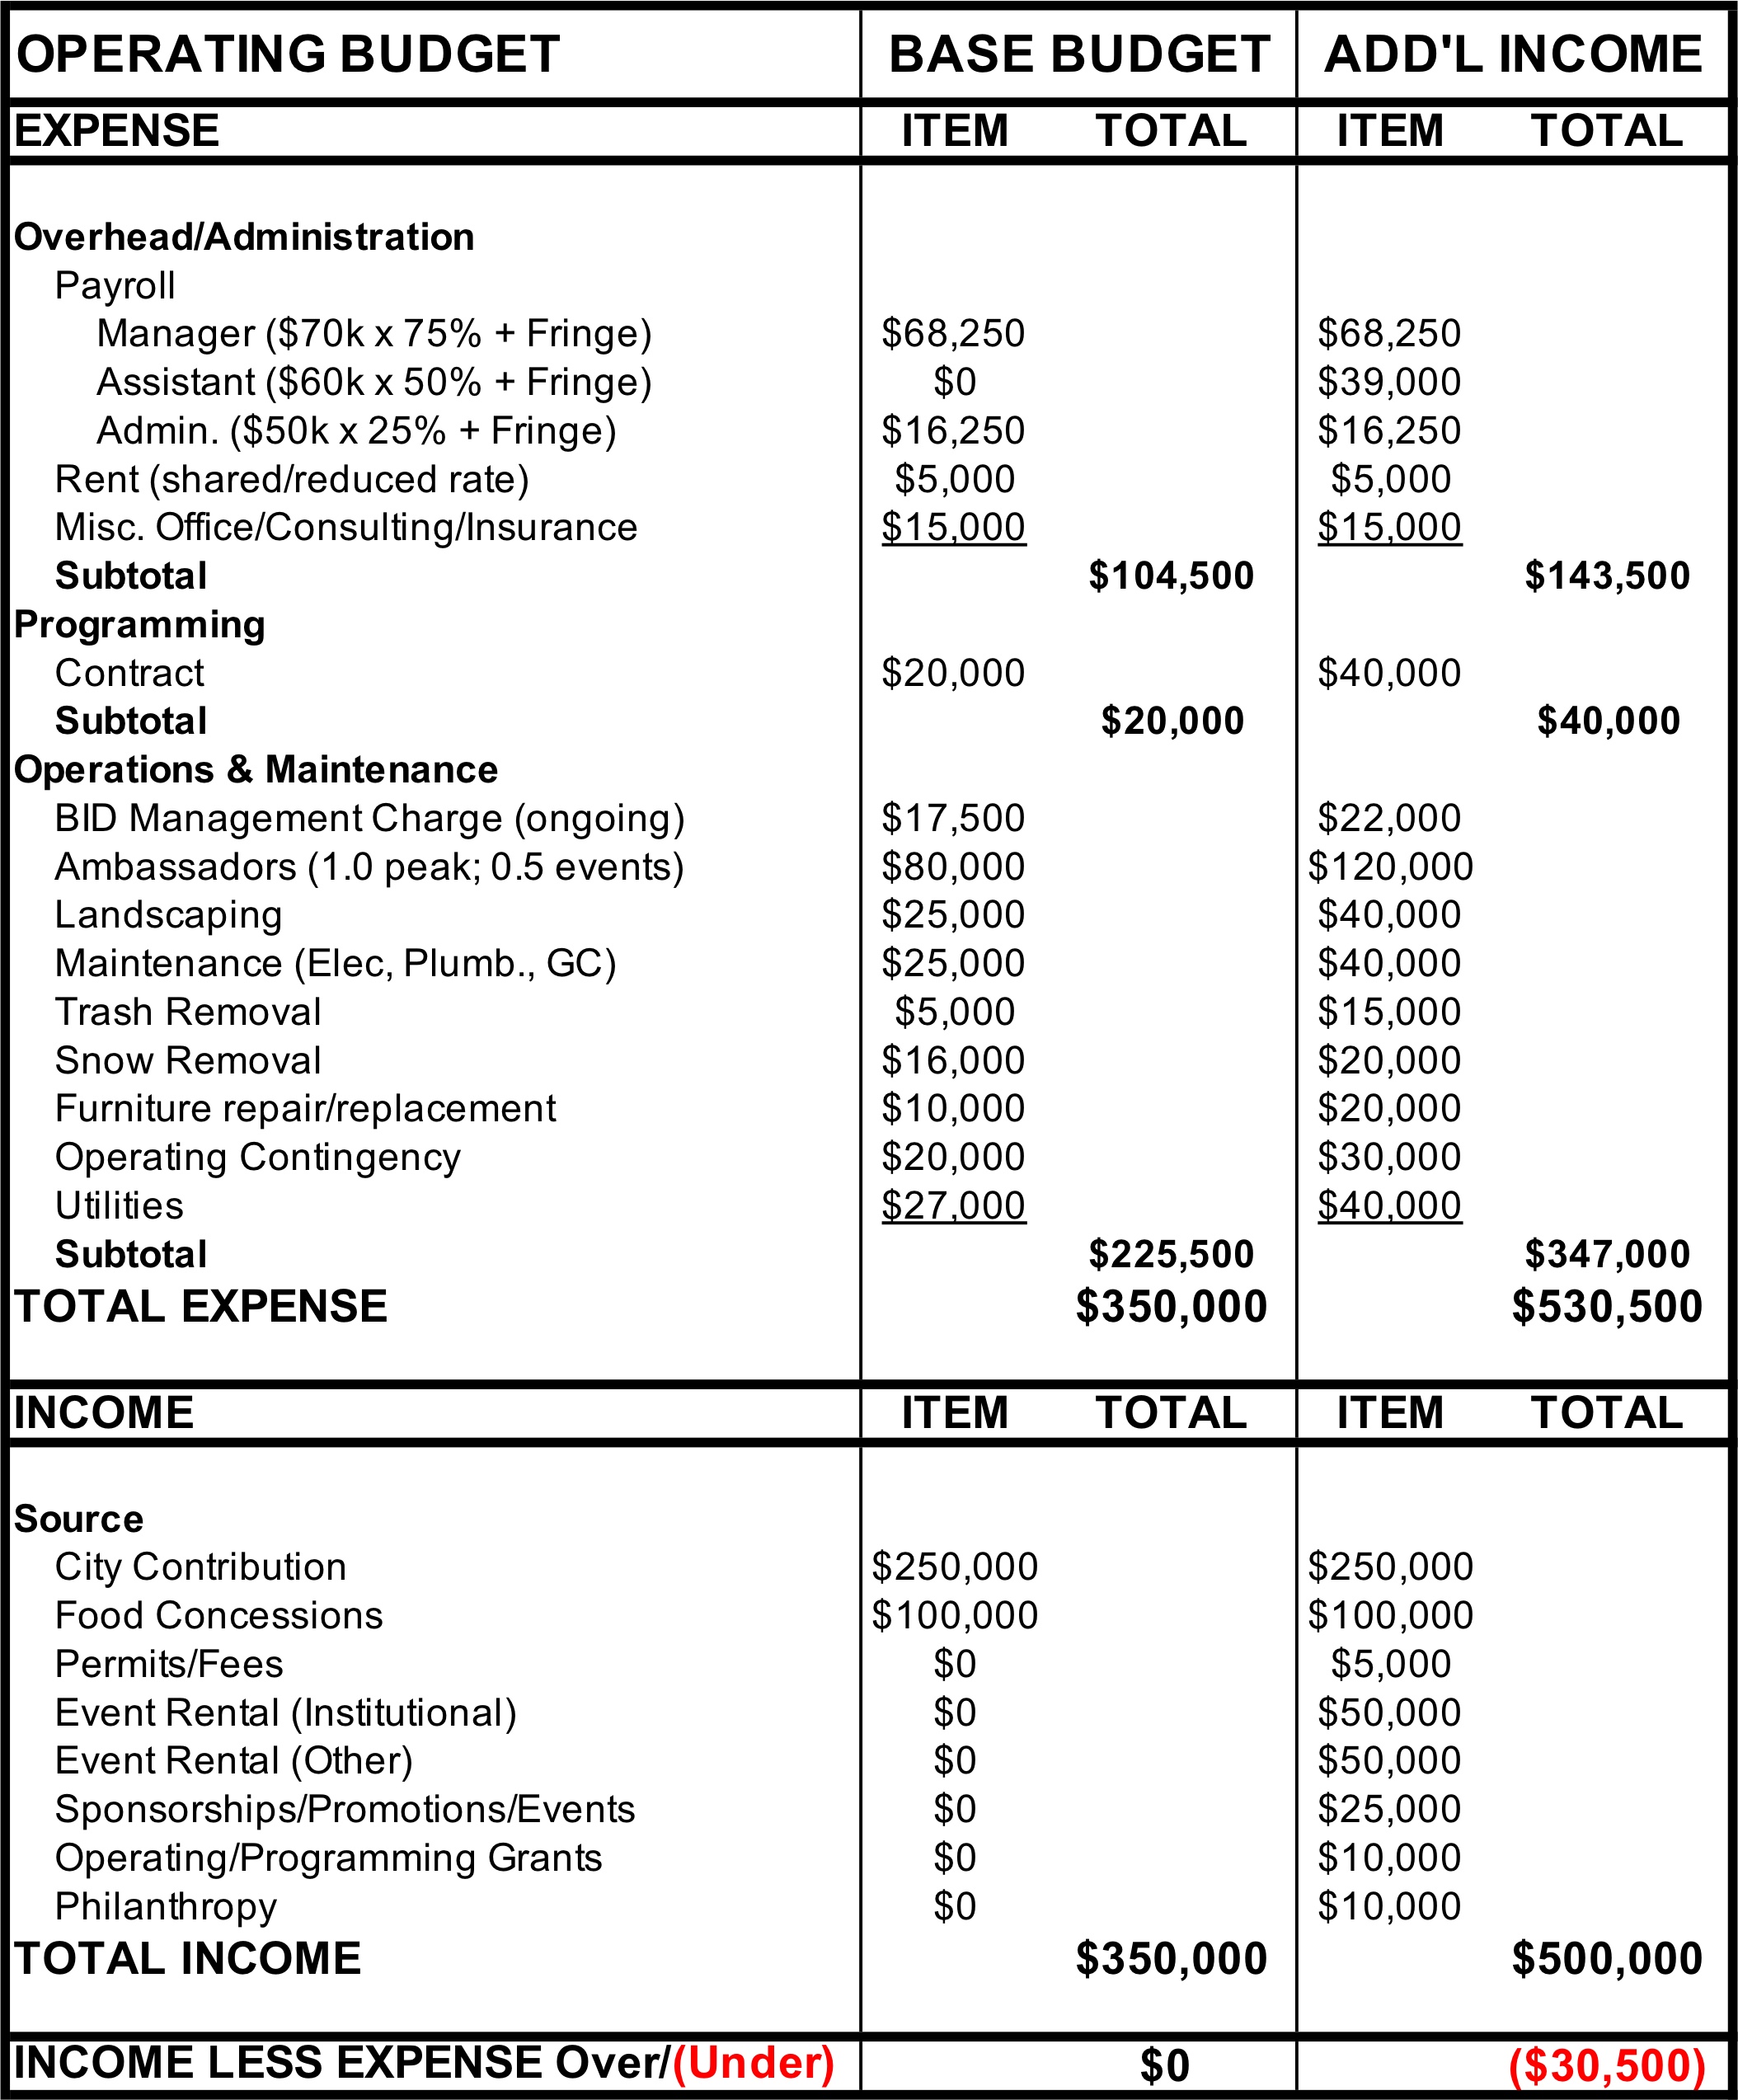 Table showing a conceptual operating budget with sections on expenses and income and dollar figures for the base budget and additional income.